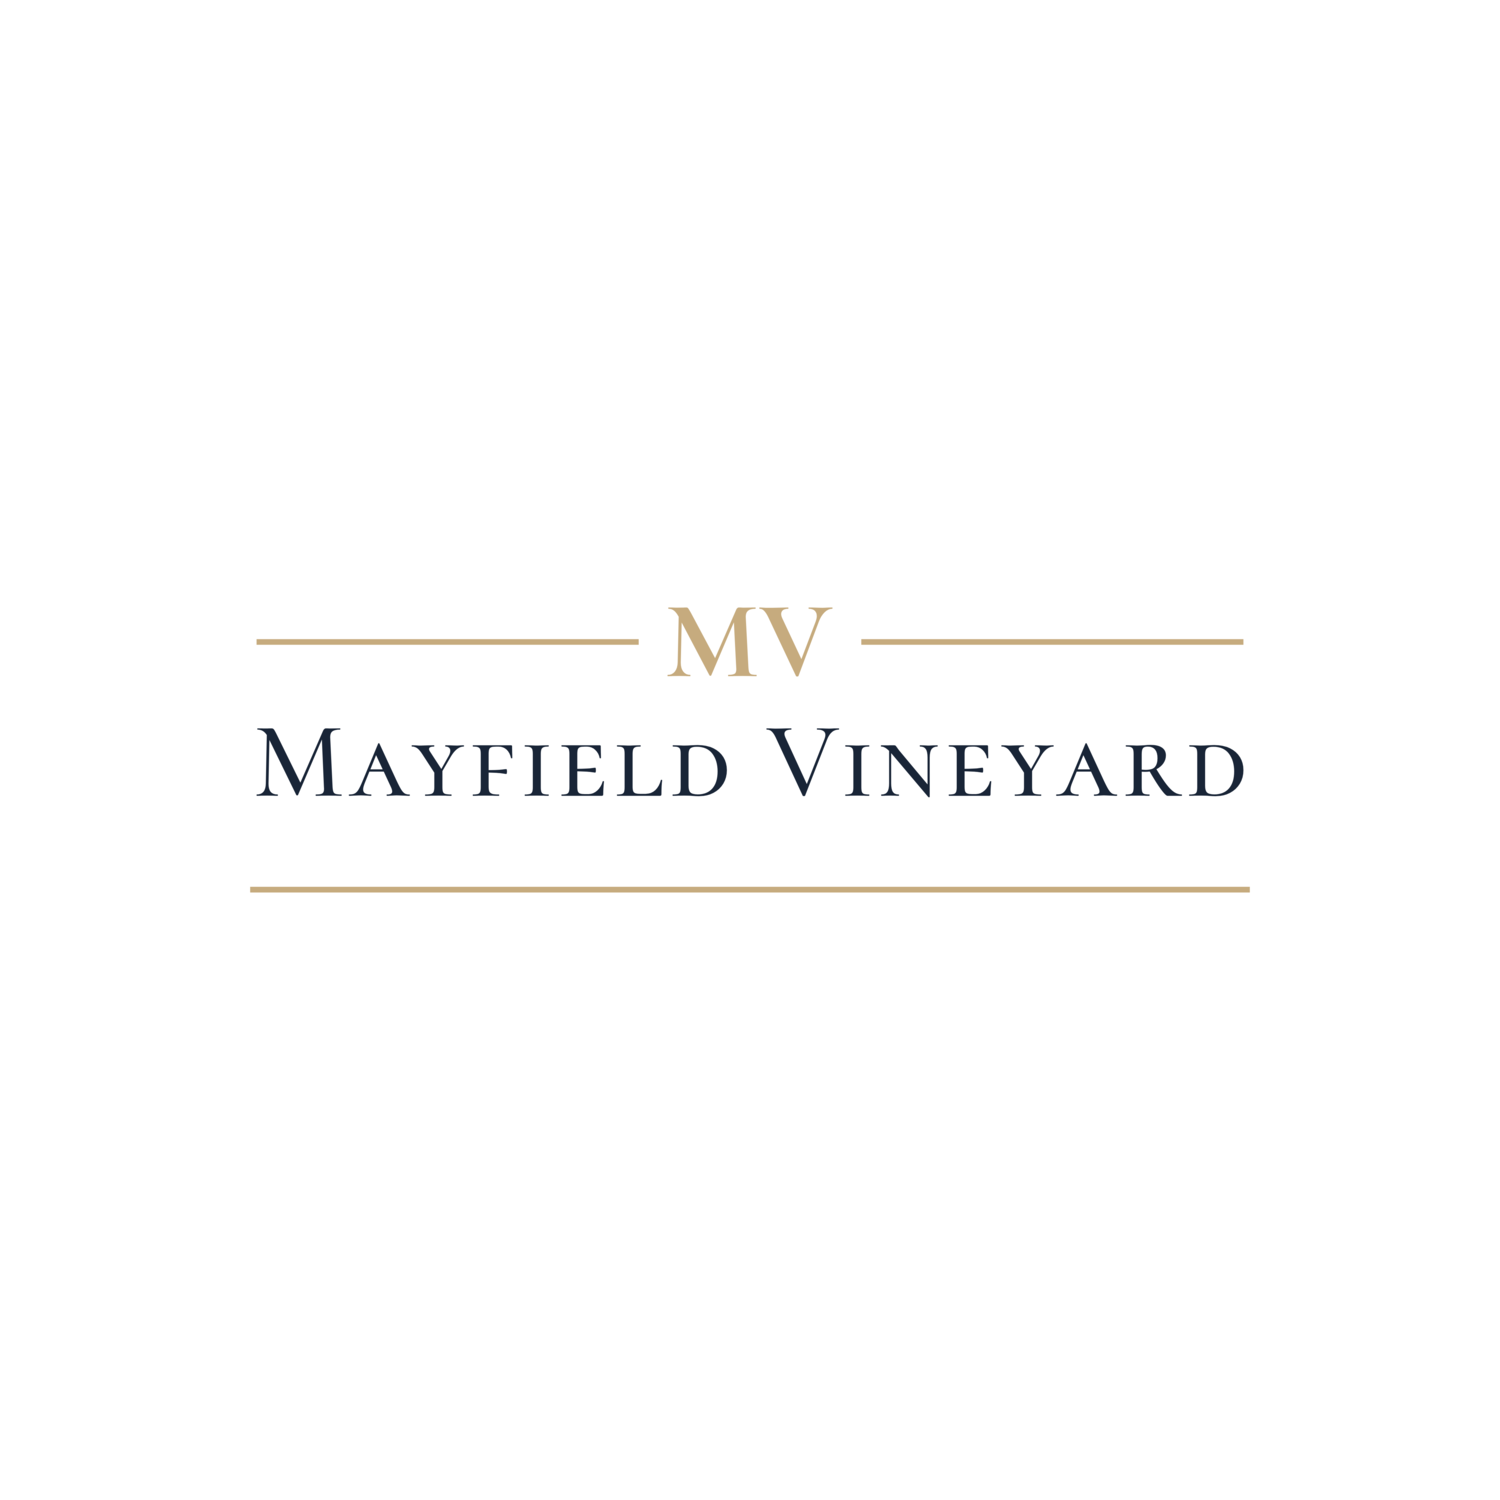 Mayfield Vineyard, Lincolnshire. Home of the Owl Collection and Rhubarb Fizz